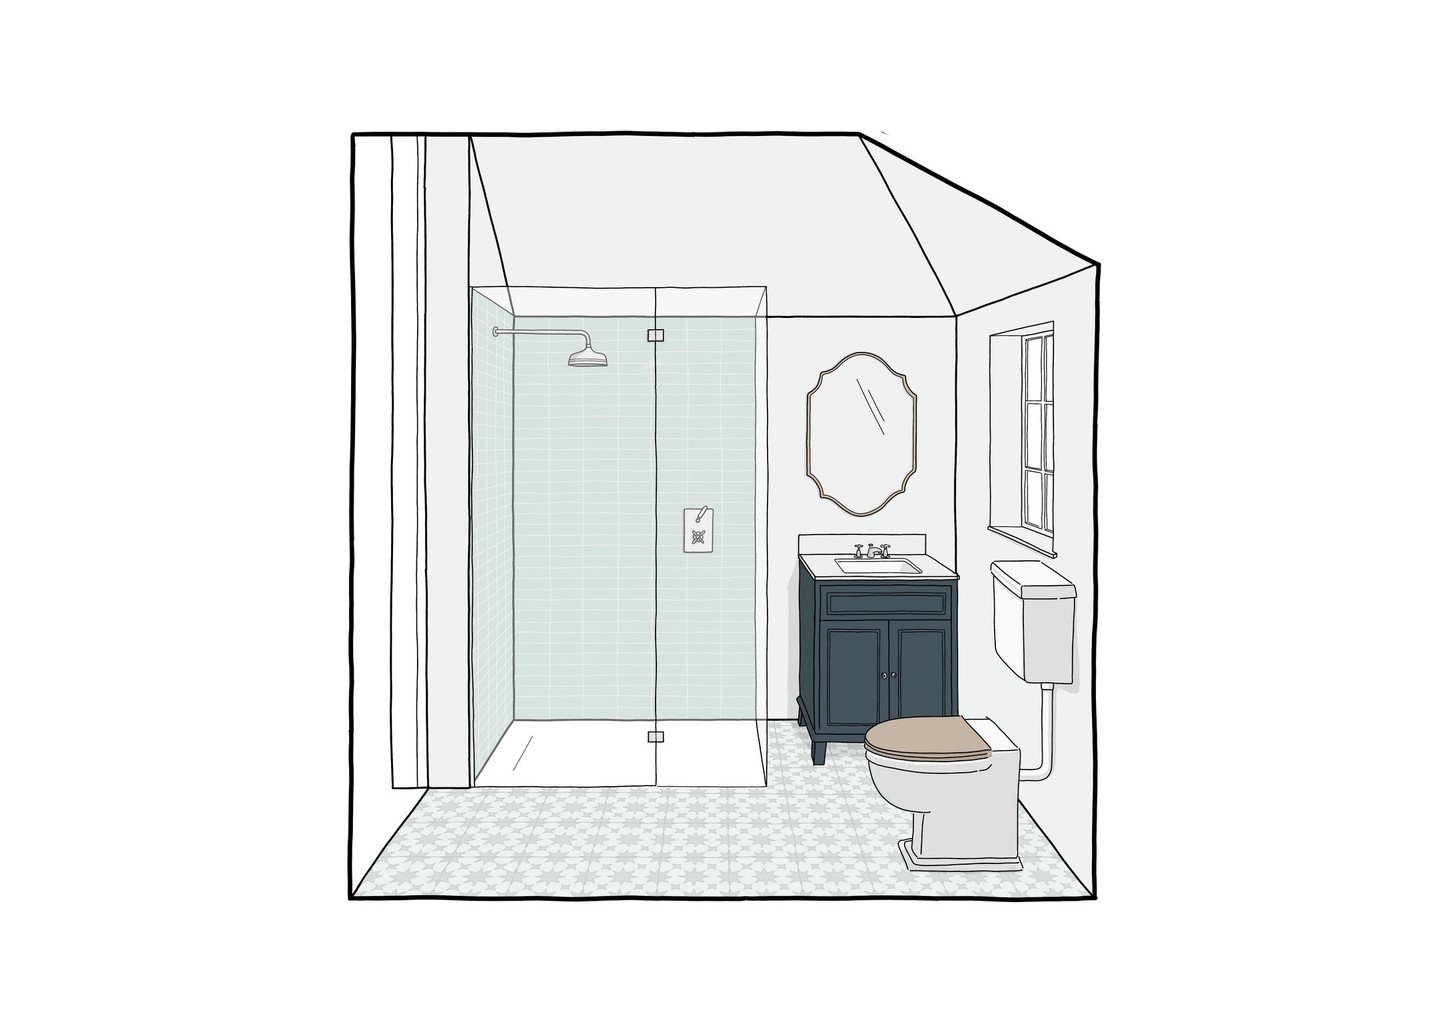 Little throwback to this serene bathroom for @annarichmonddesign. Always love to see how the design changes between the first sketch and the finished space!⁠
⁠
-----⁠
⁠
⁠
#katherinedaunceyillustration #architecturaldrawing #architecturalvisualisation